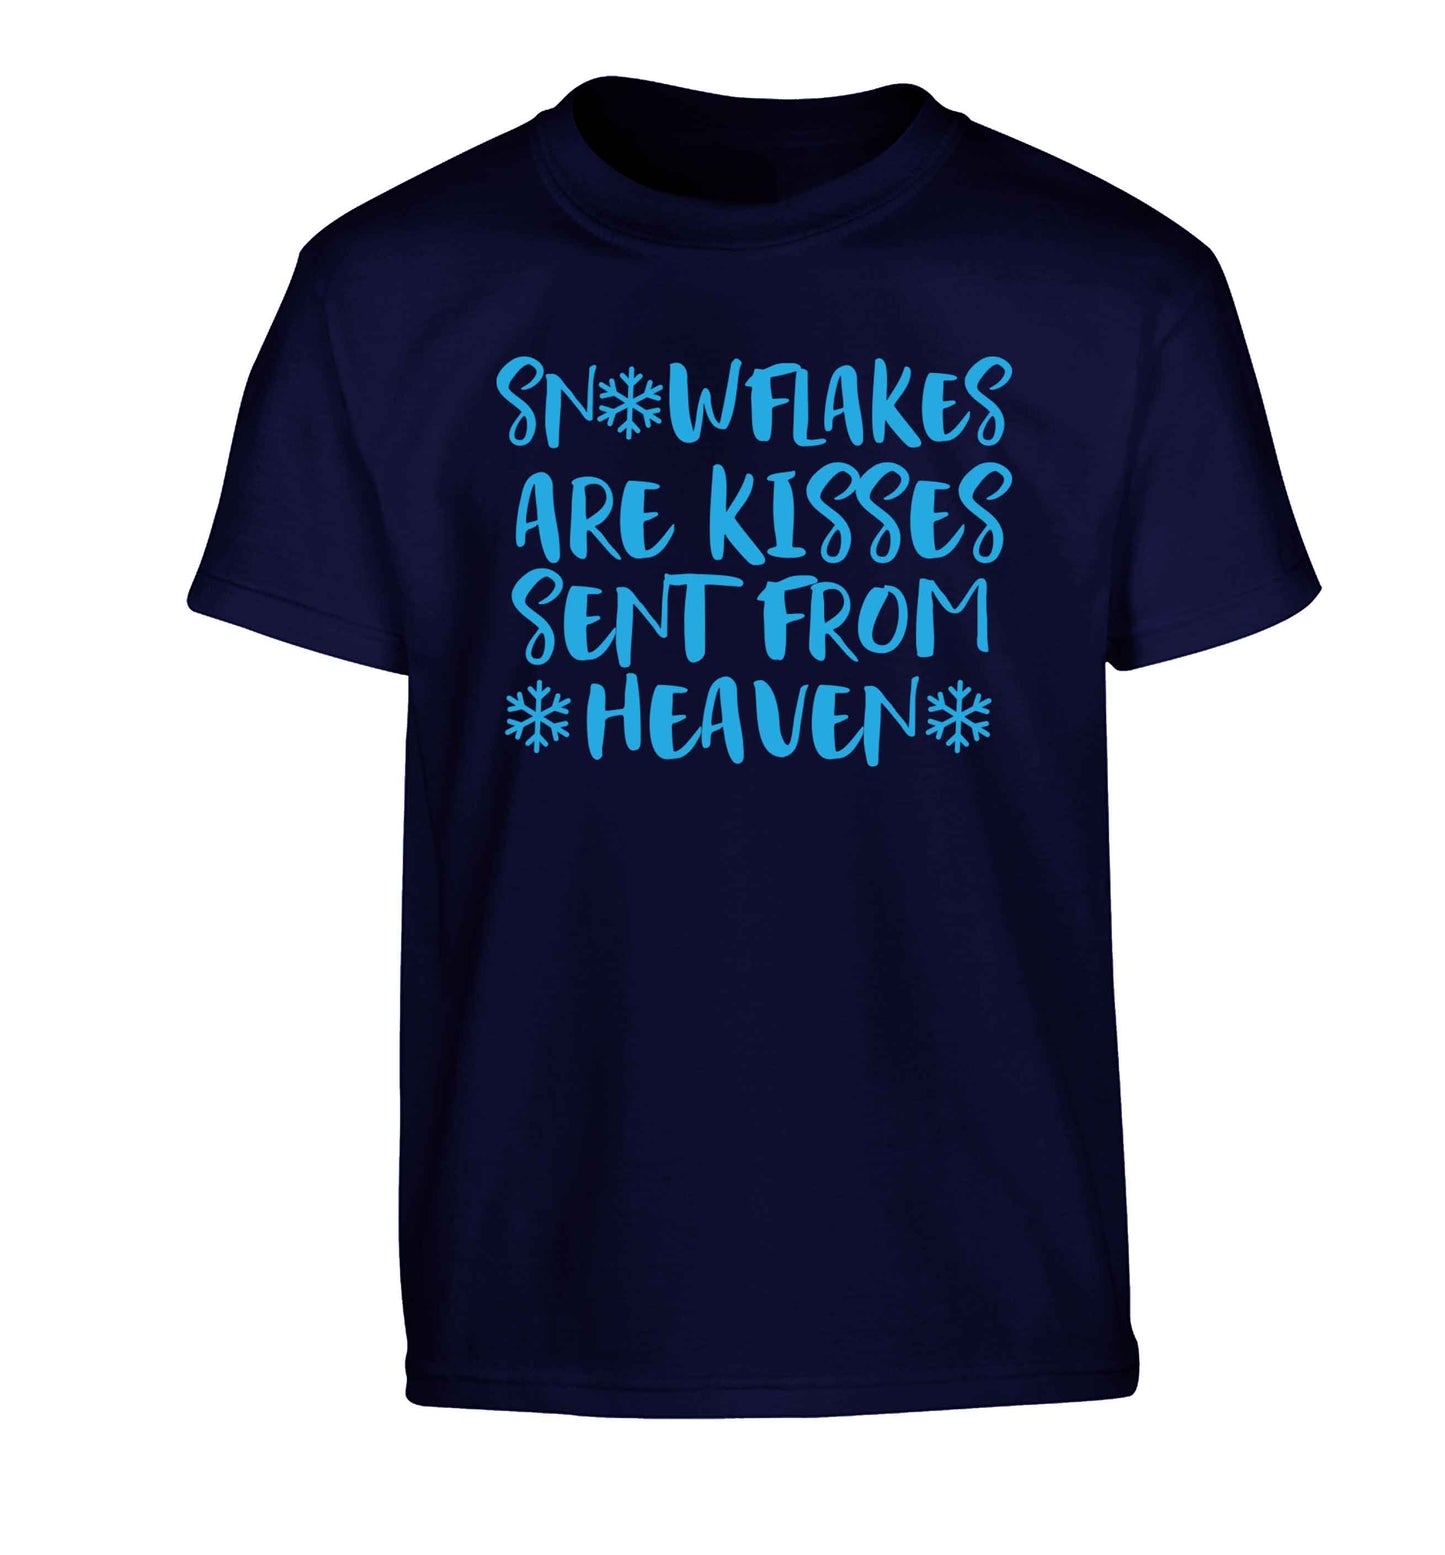 Snowflakes are kisses sent from heaven Children's navy Tshirt 12-13 Years